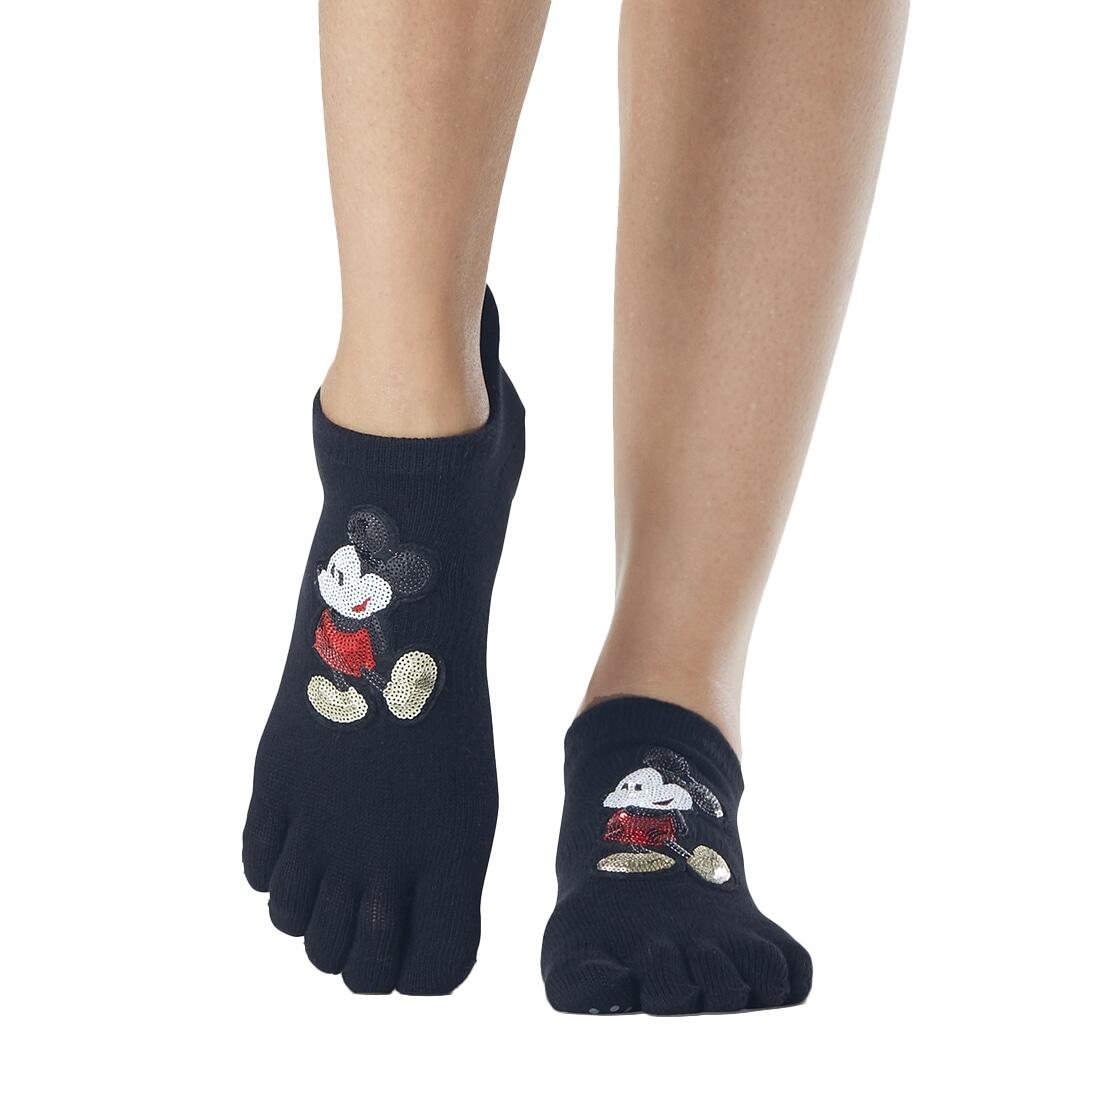 FITNESS-MAD Womens/Ladies Mickey Mouse Disney Sequins Toe Socks (Black/Red/White)